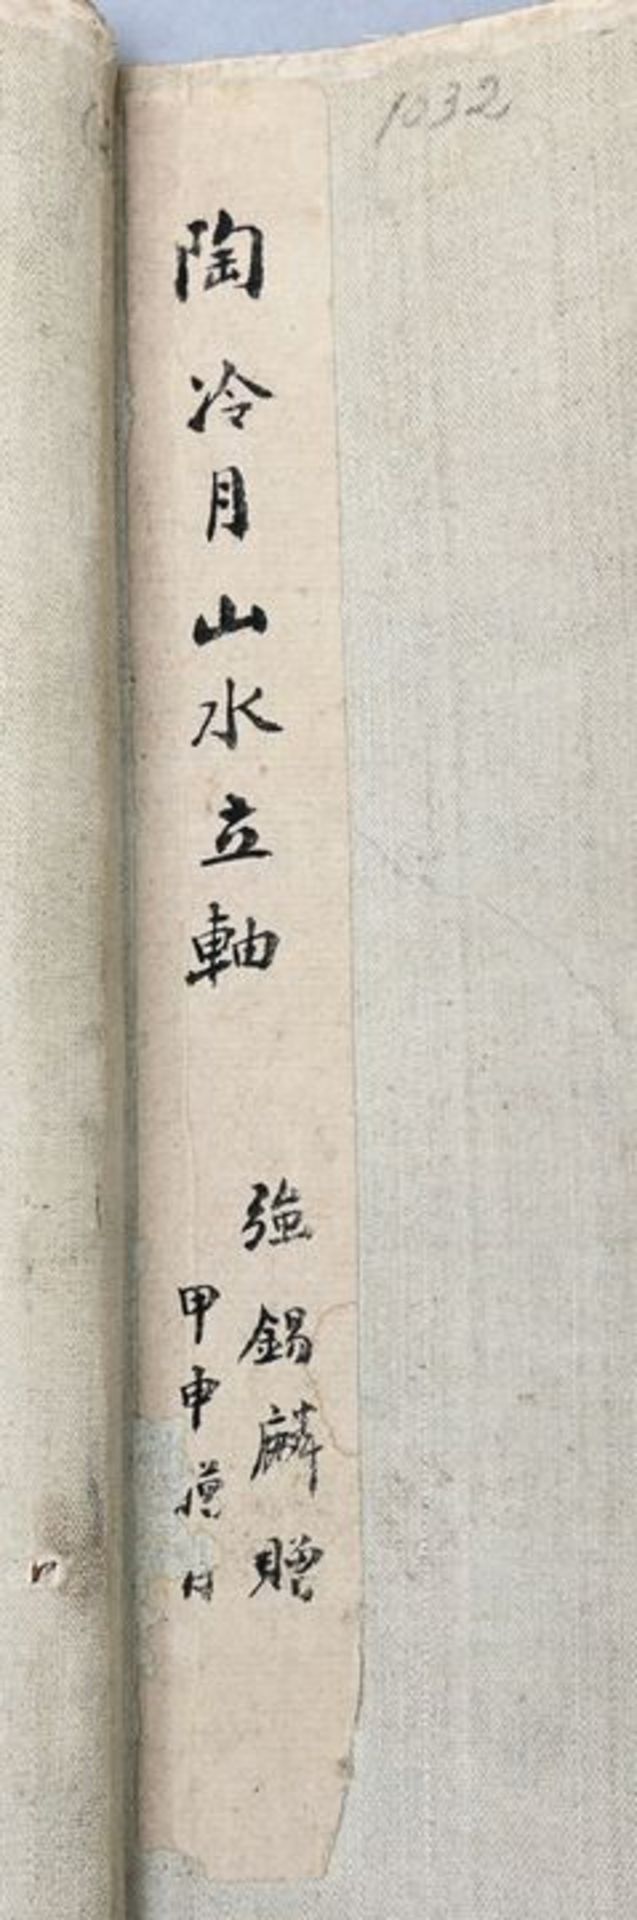 Hängerolle/ hanging scroll - Image 5 of 5